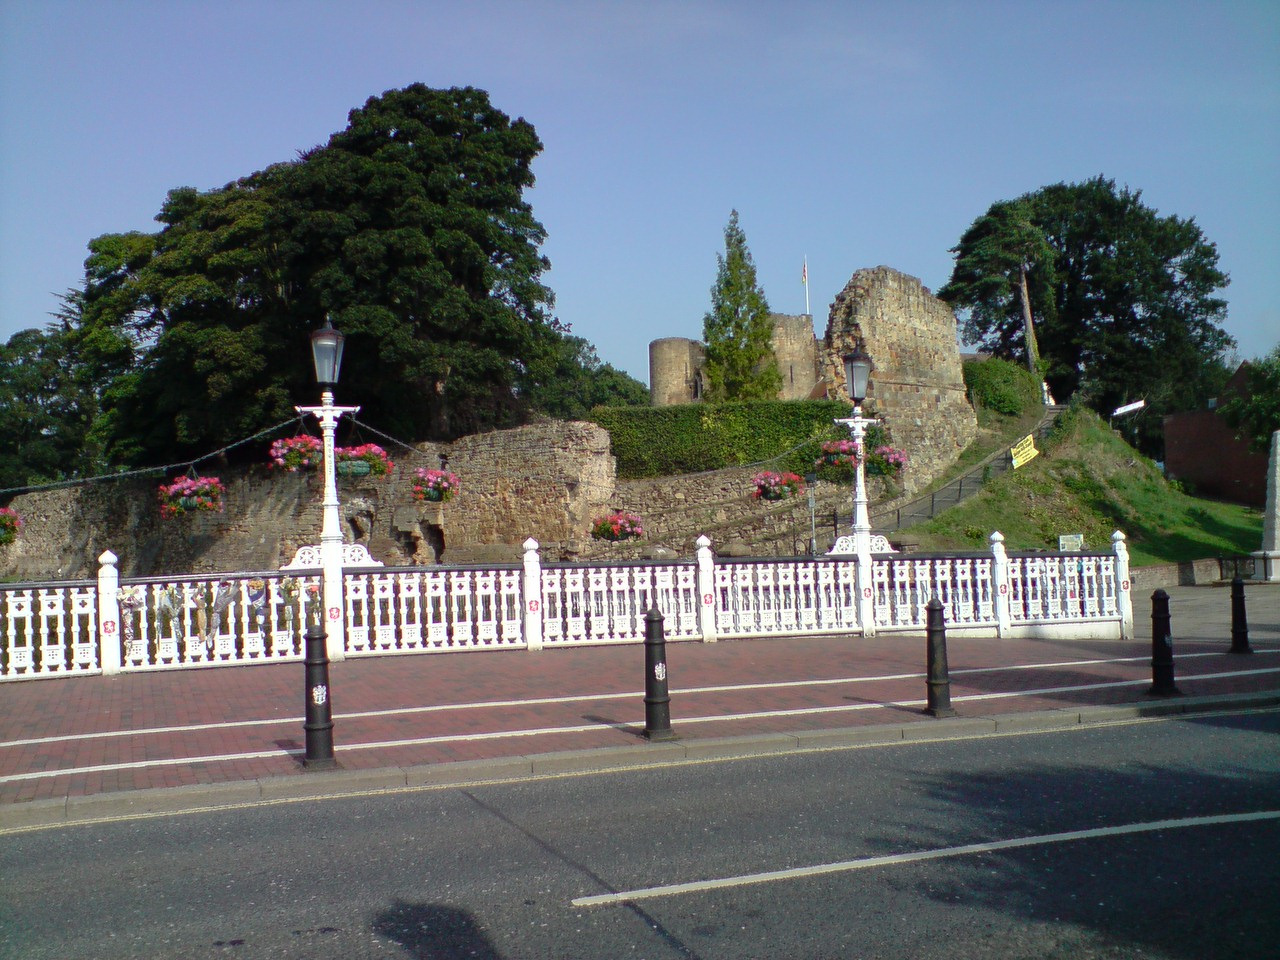 Tonbrige Castle from the high street